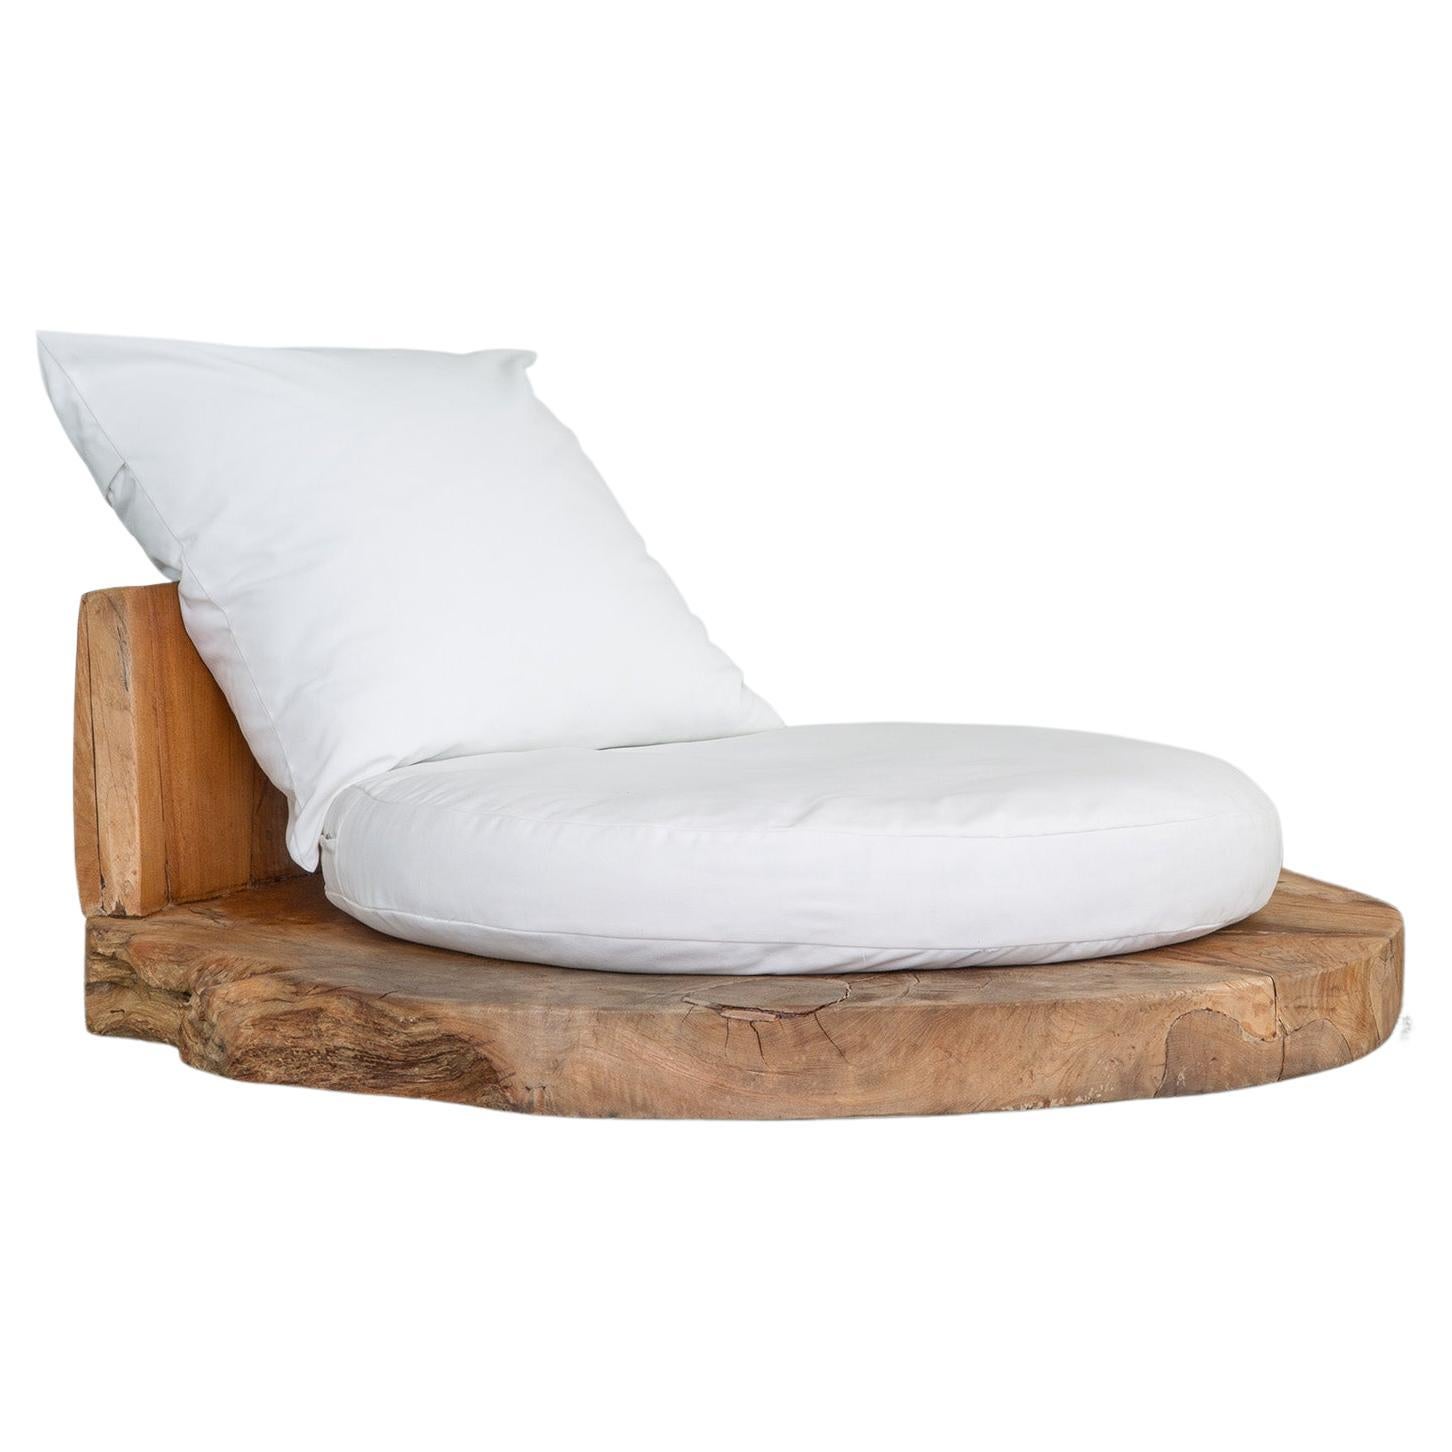 Round Organic Wood Lounge Chair by CEU Studio, Represented by Tuleste Factory For Sale